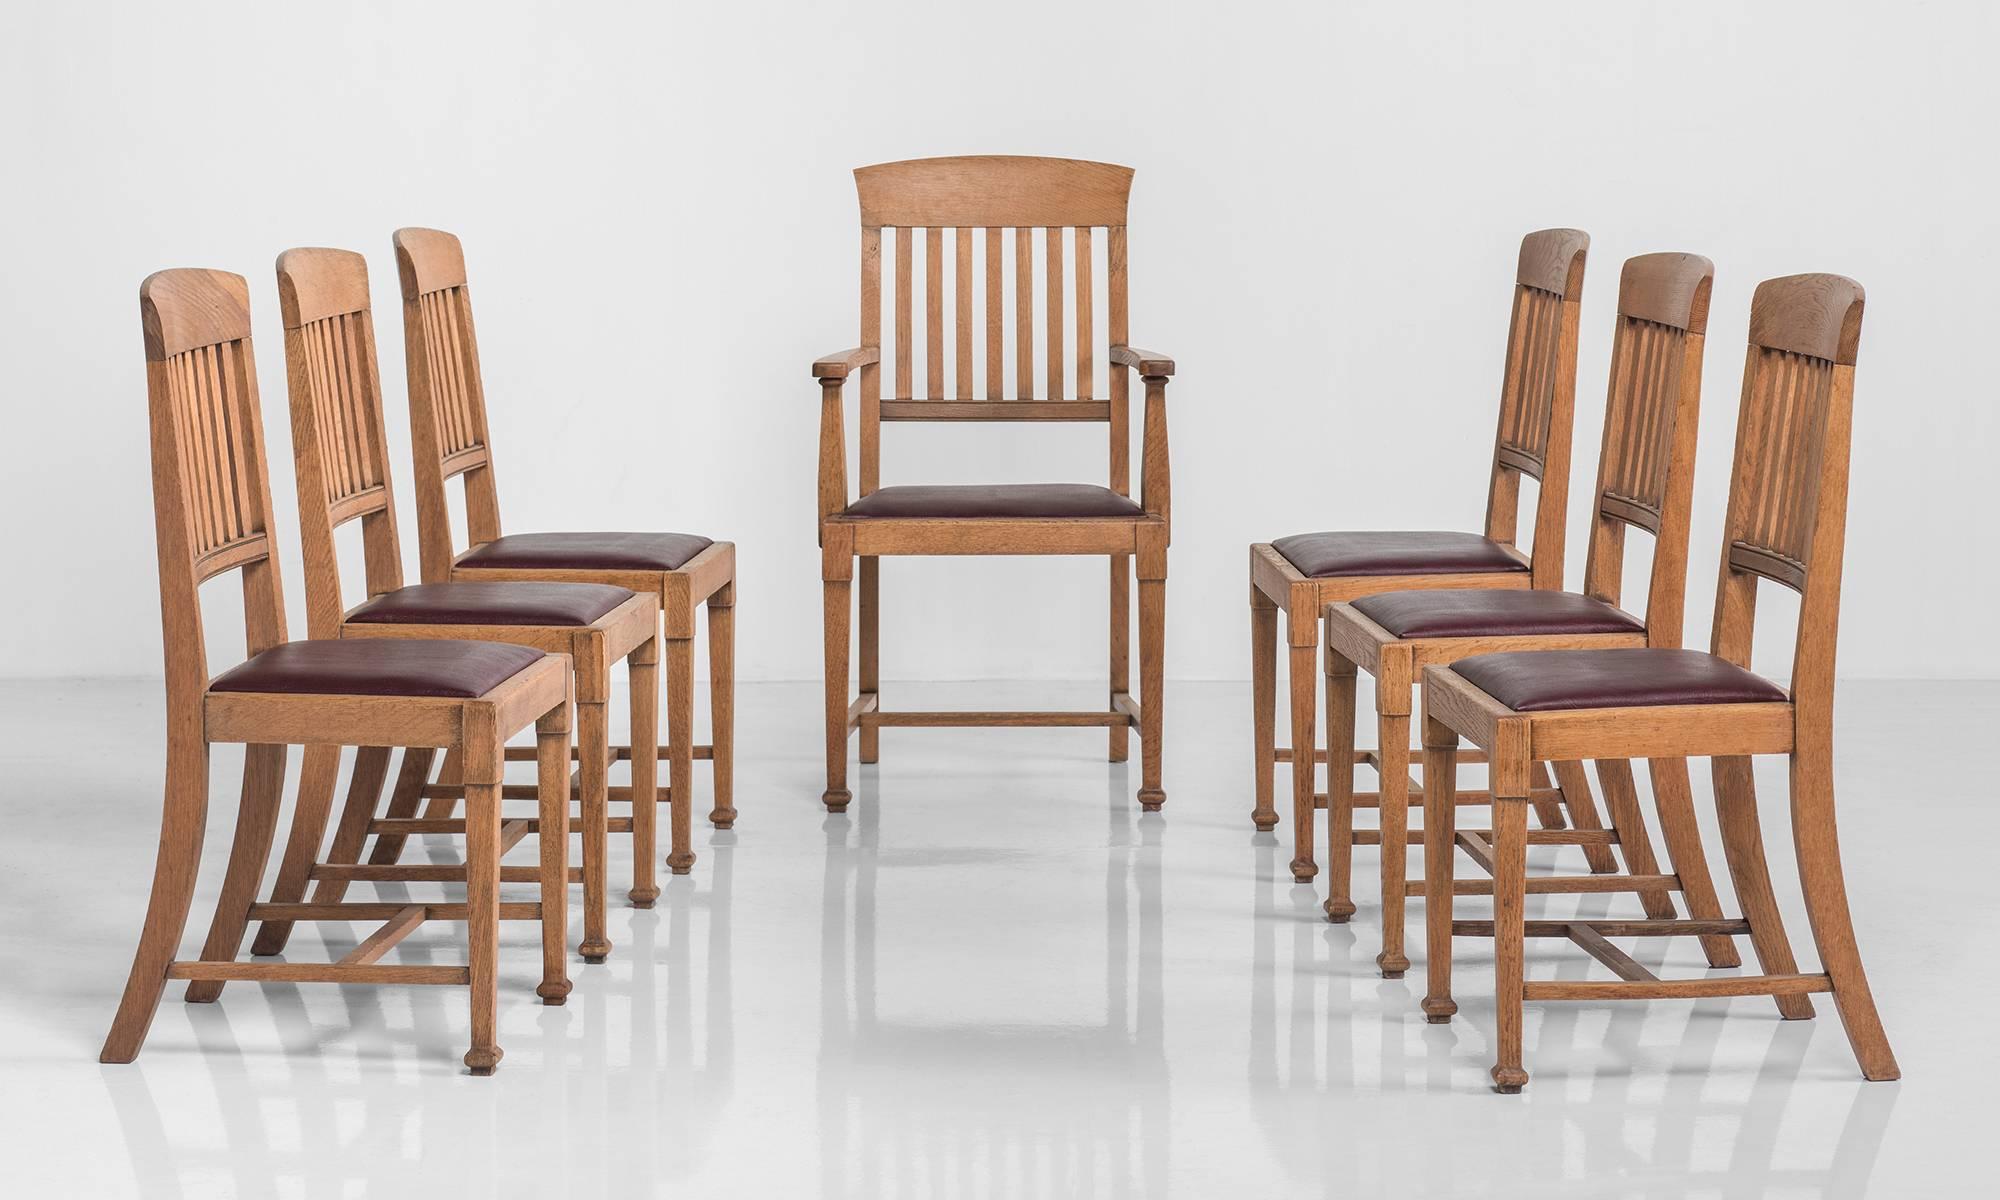 Set of eight oak dining chairs, circa 1900.

Solid oak, produced by Warings of London, six chairs and two armchairs. 